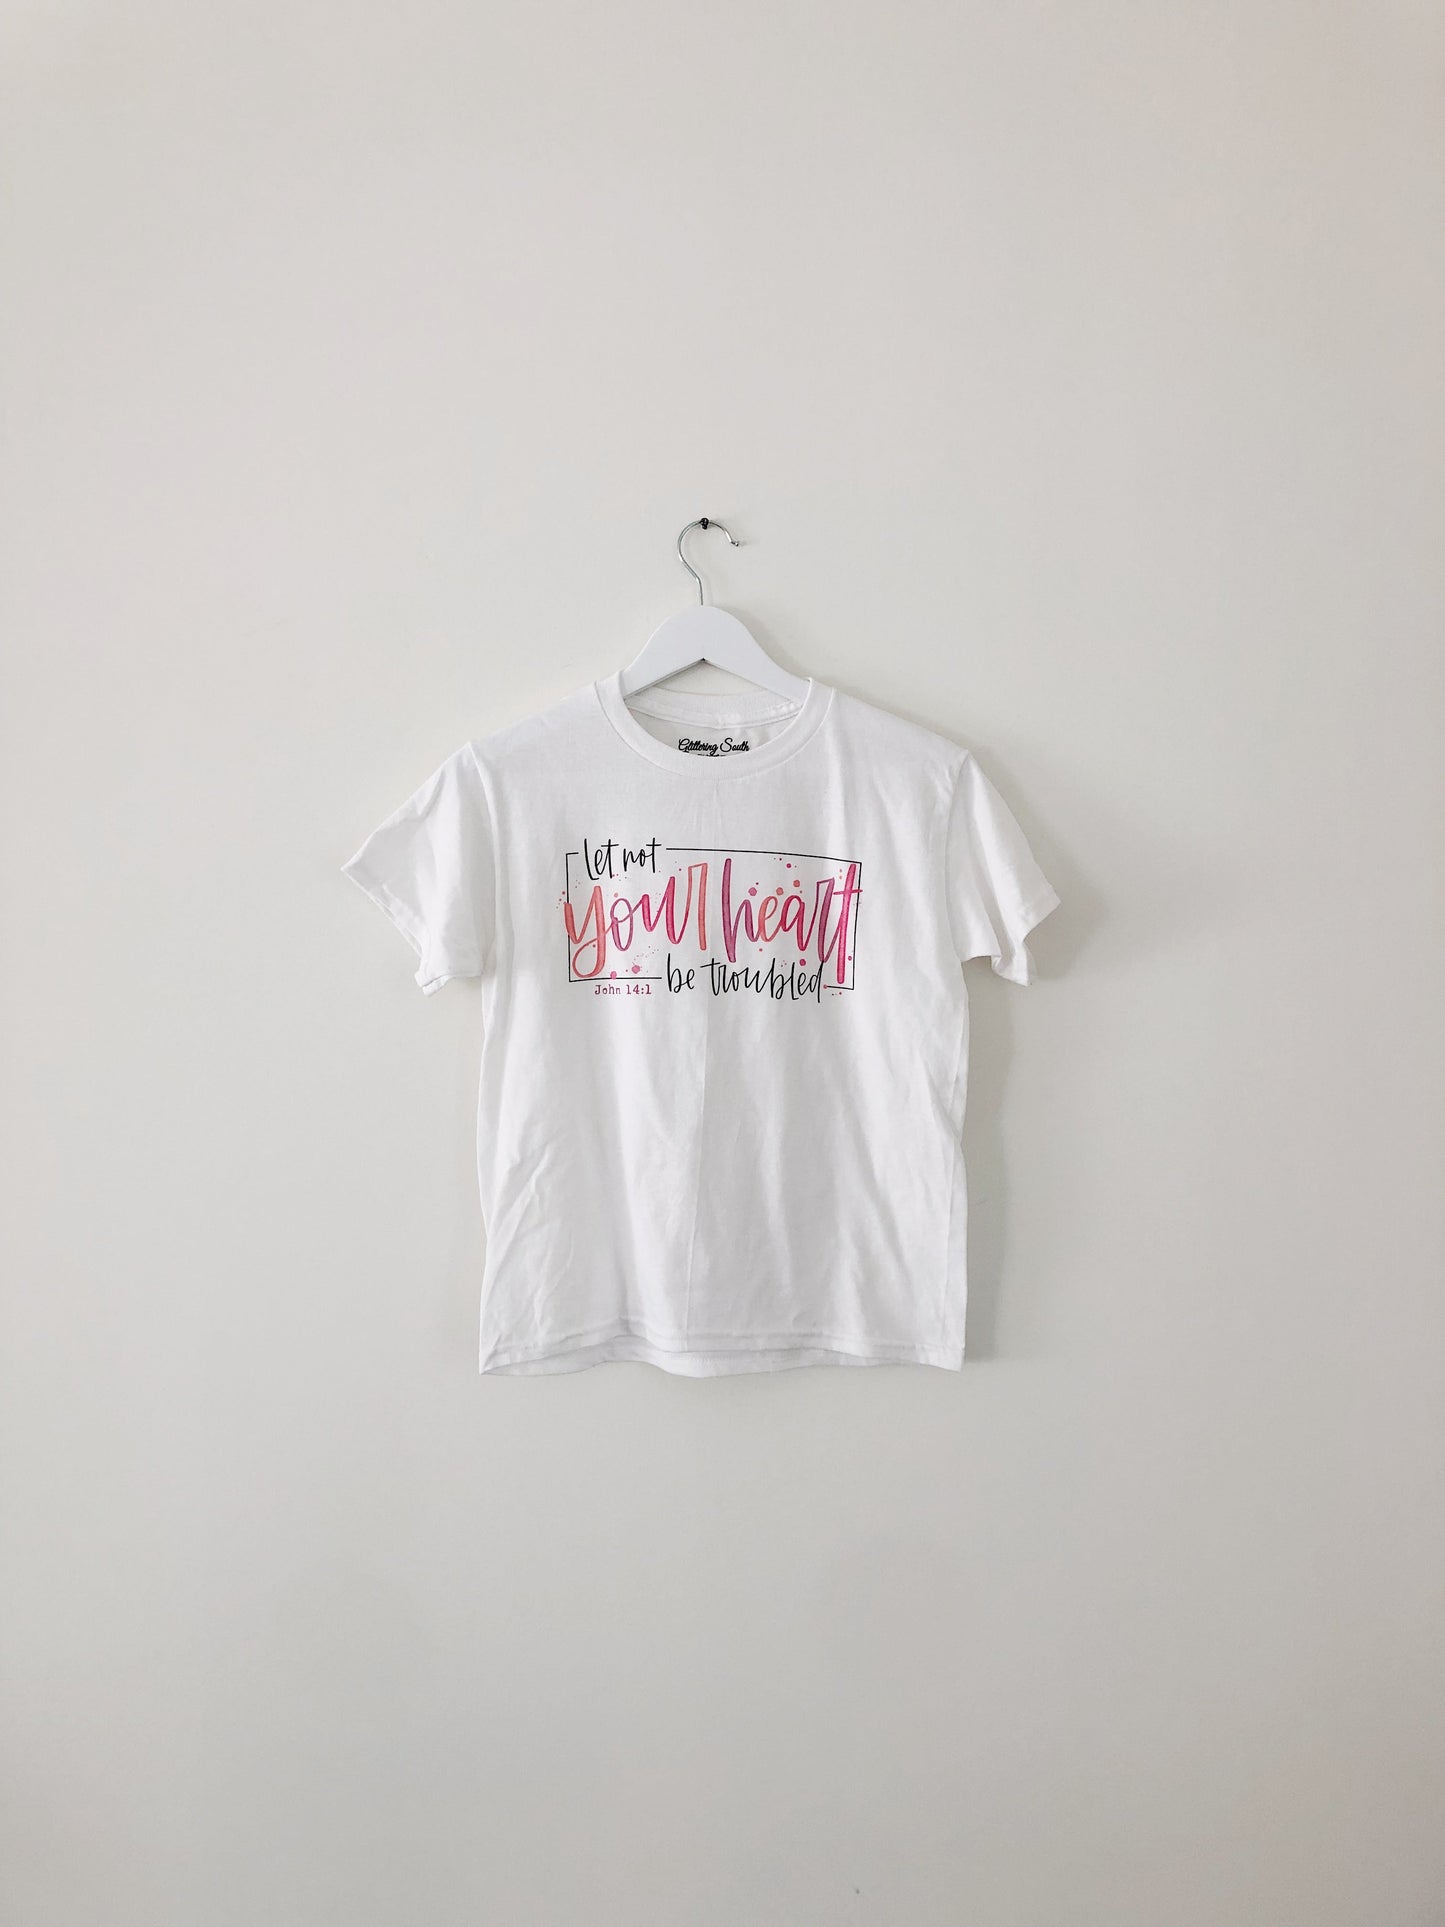 Let Not Your Heart T-Shirt